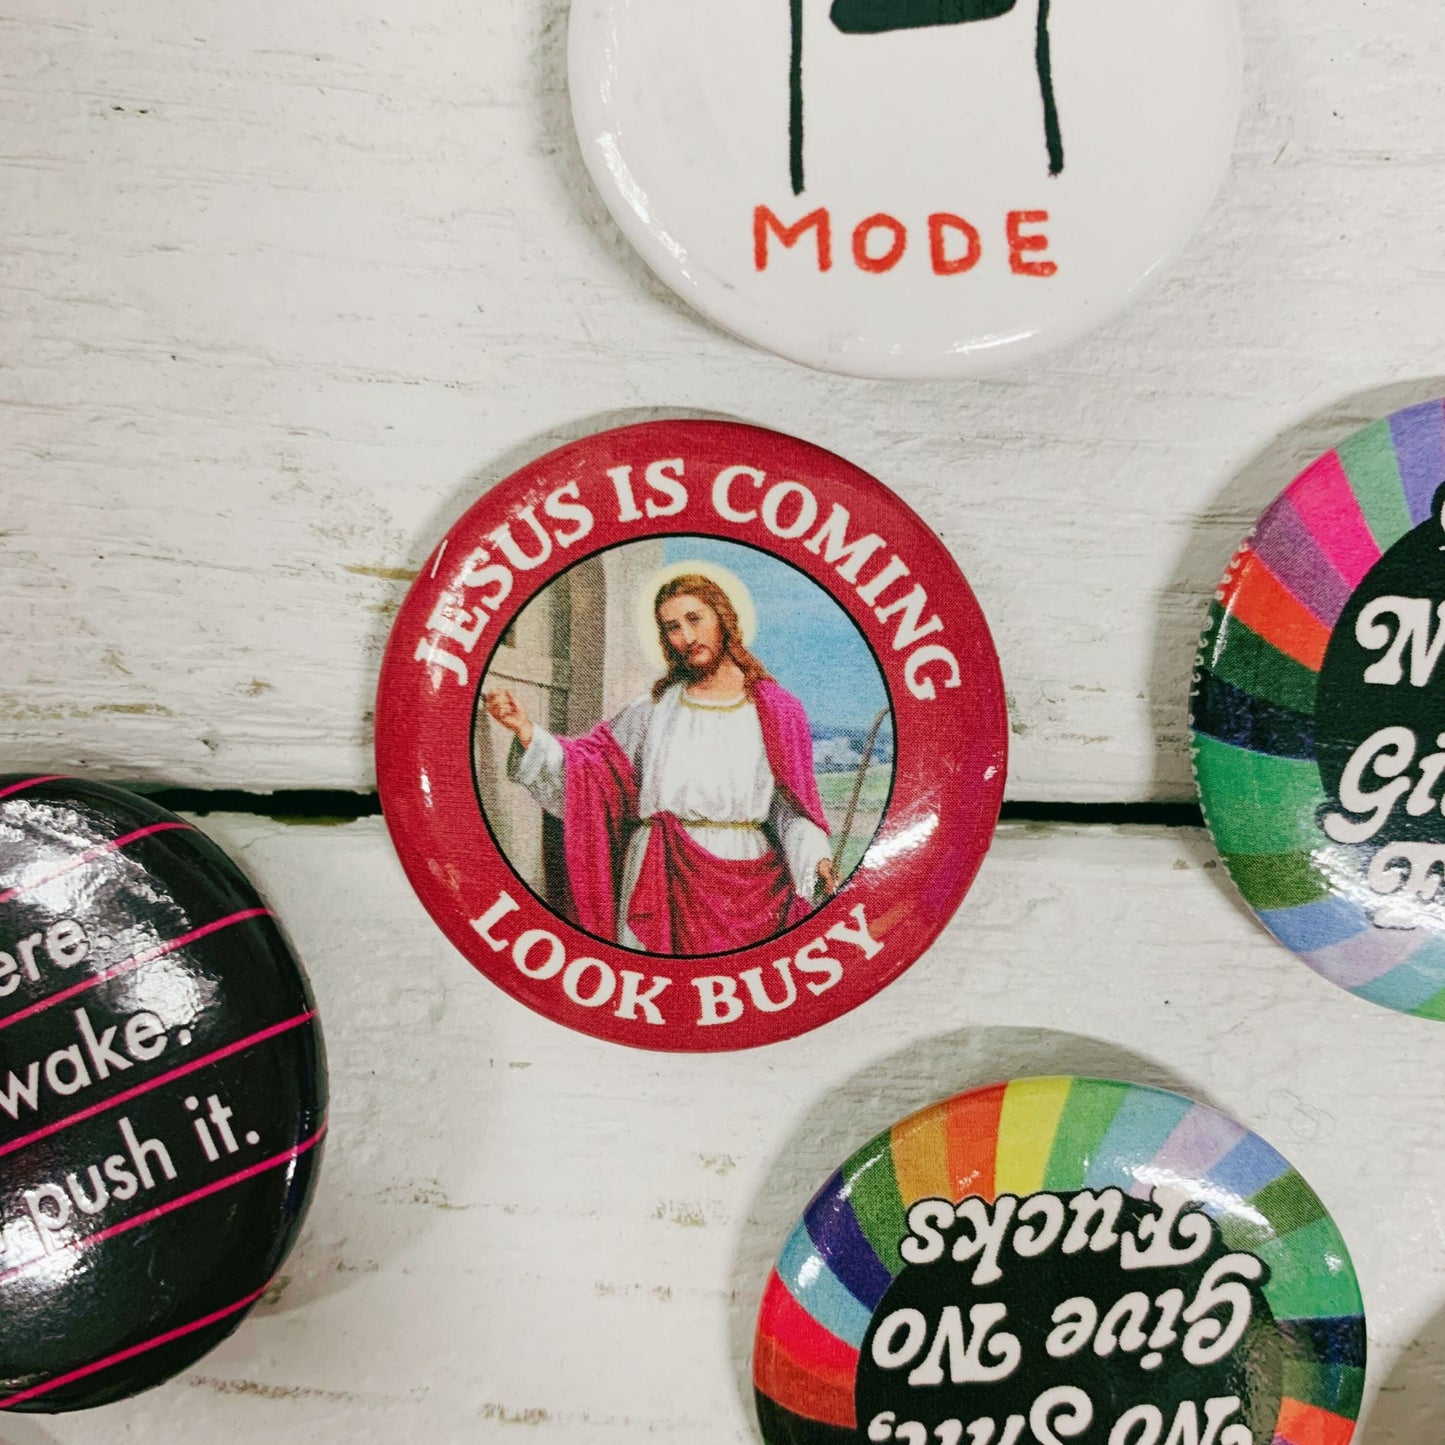 Jesus Is Coming. Look Busy Lapel Pin Button | Pinback Button Badge | 1.3"